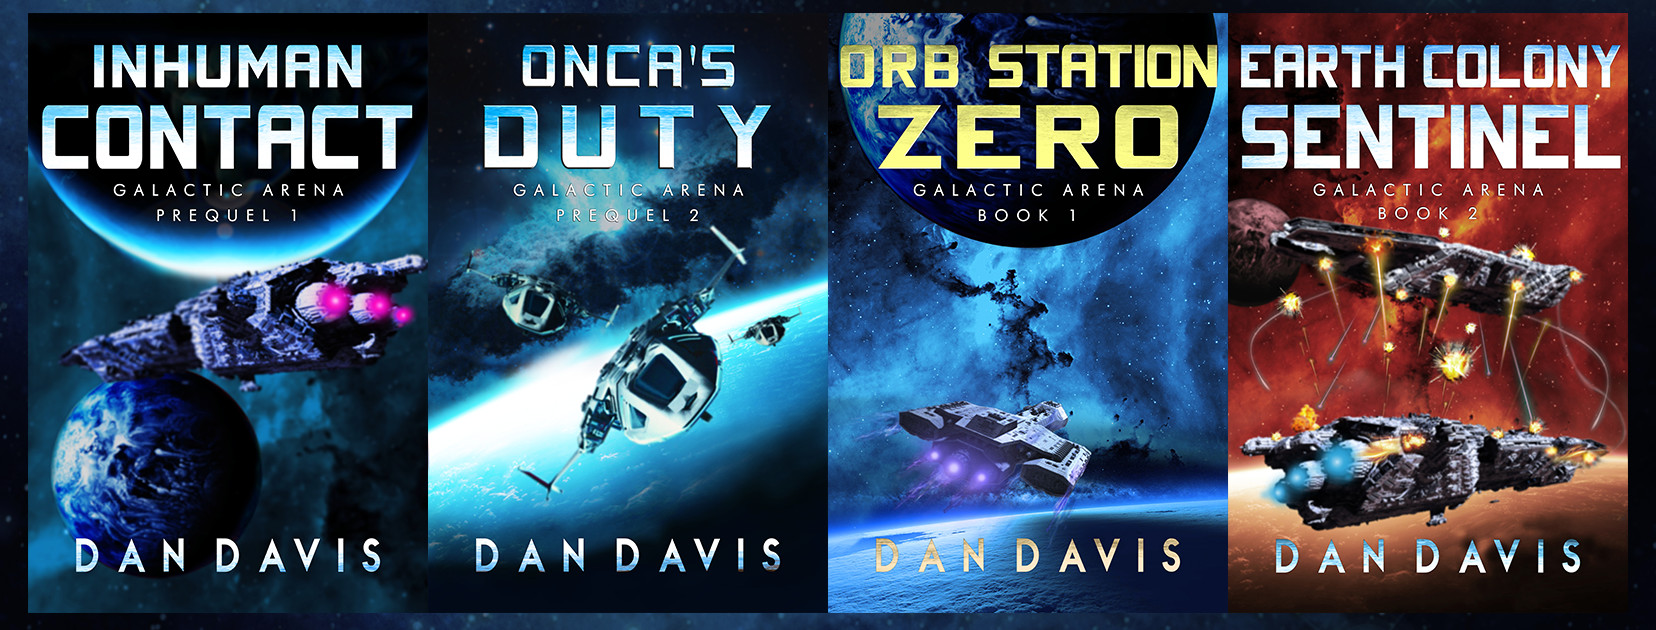 New covers for the Galactic Arena #scifi series